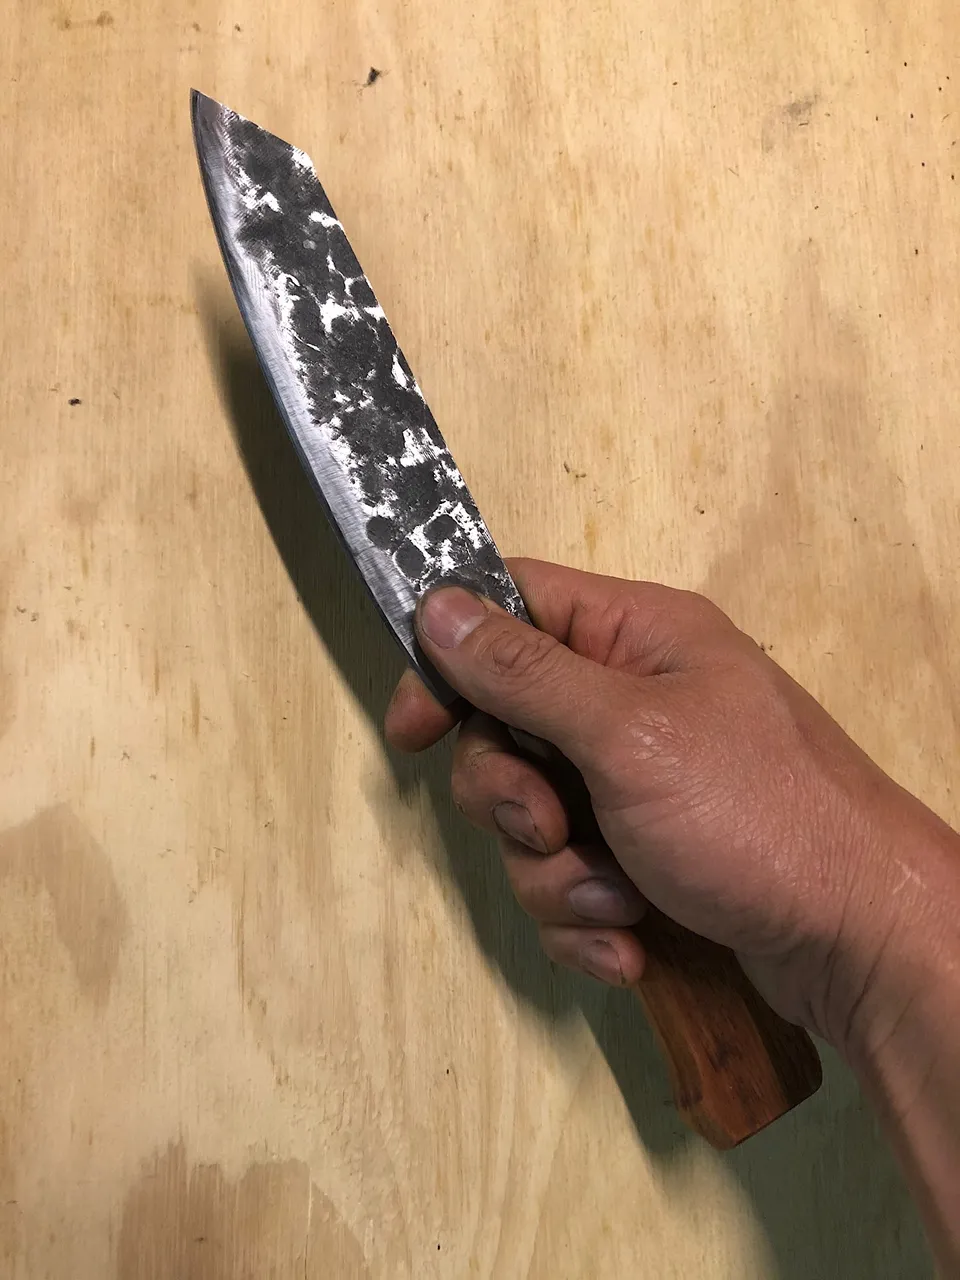 Holding my DIY chef's knife